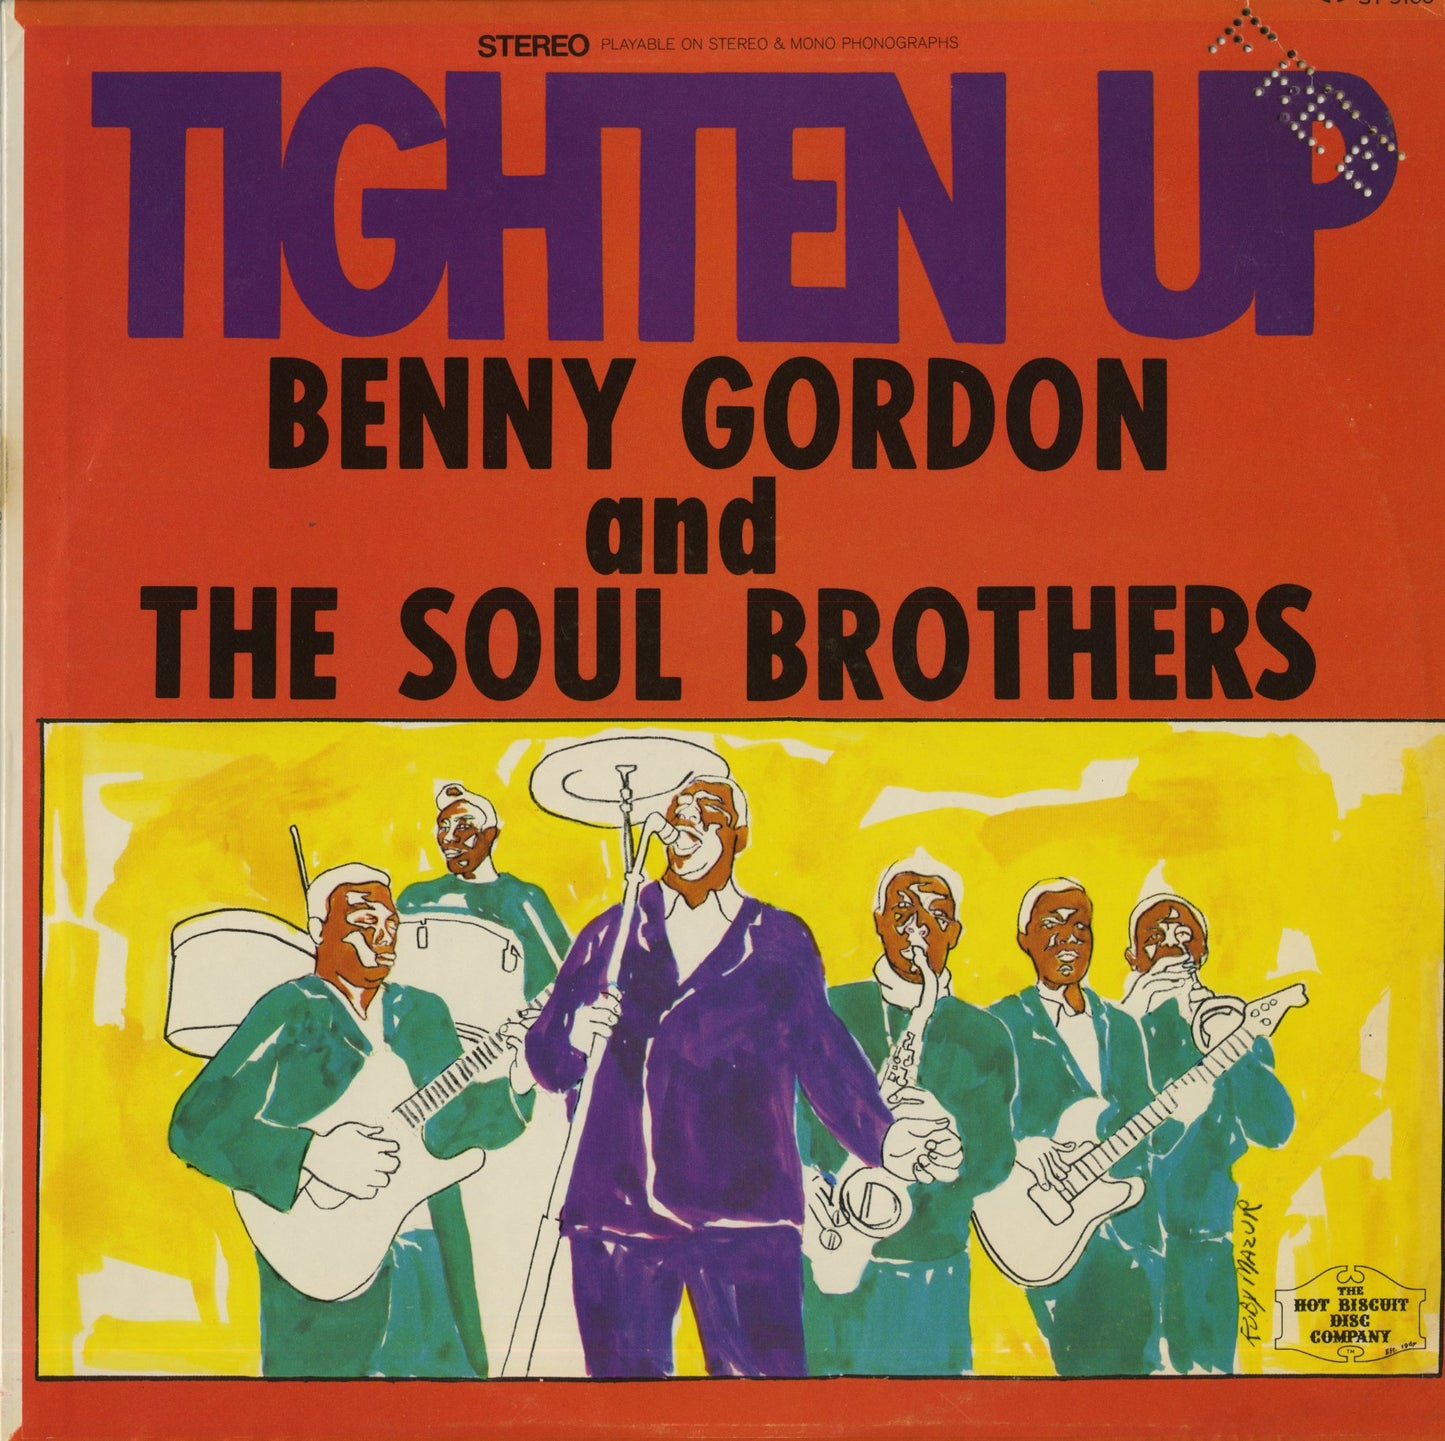 Benny Gordon and The Soul Brothers / ベニー・ゴードン＆ソウル・ブラザーズ / Tighten Up (ST9100)